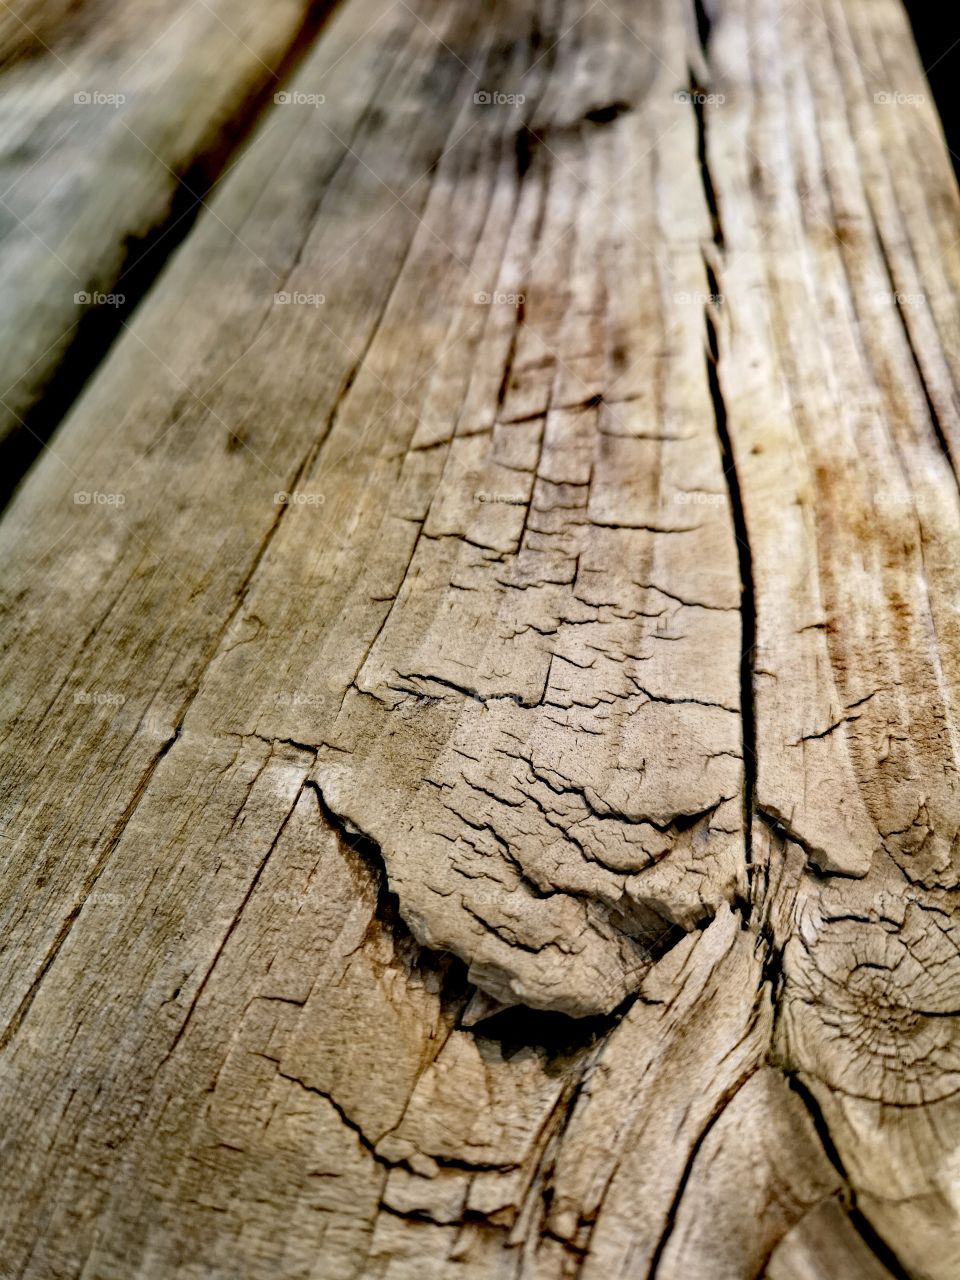 I just love the look of wood!